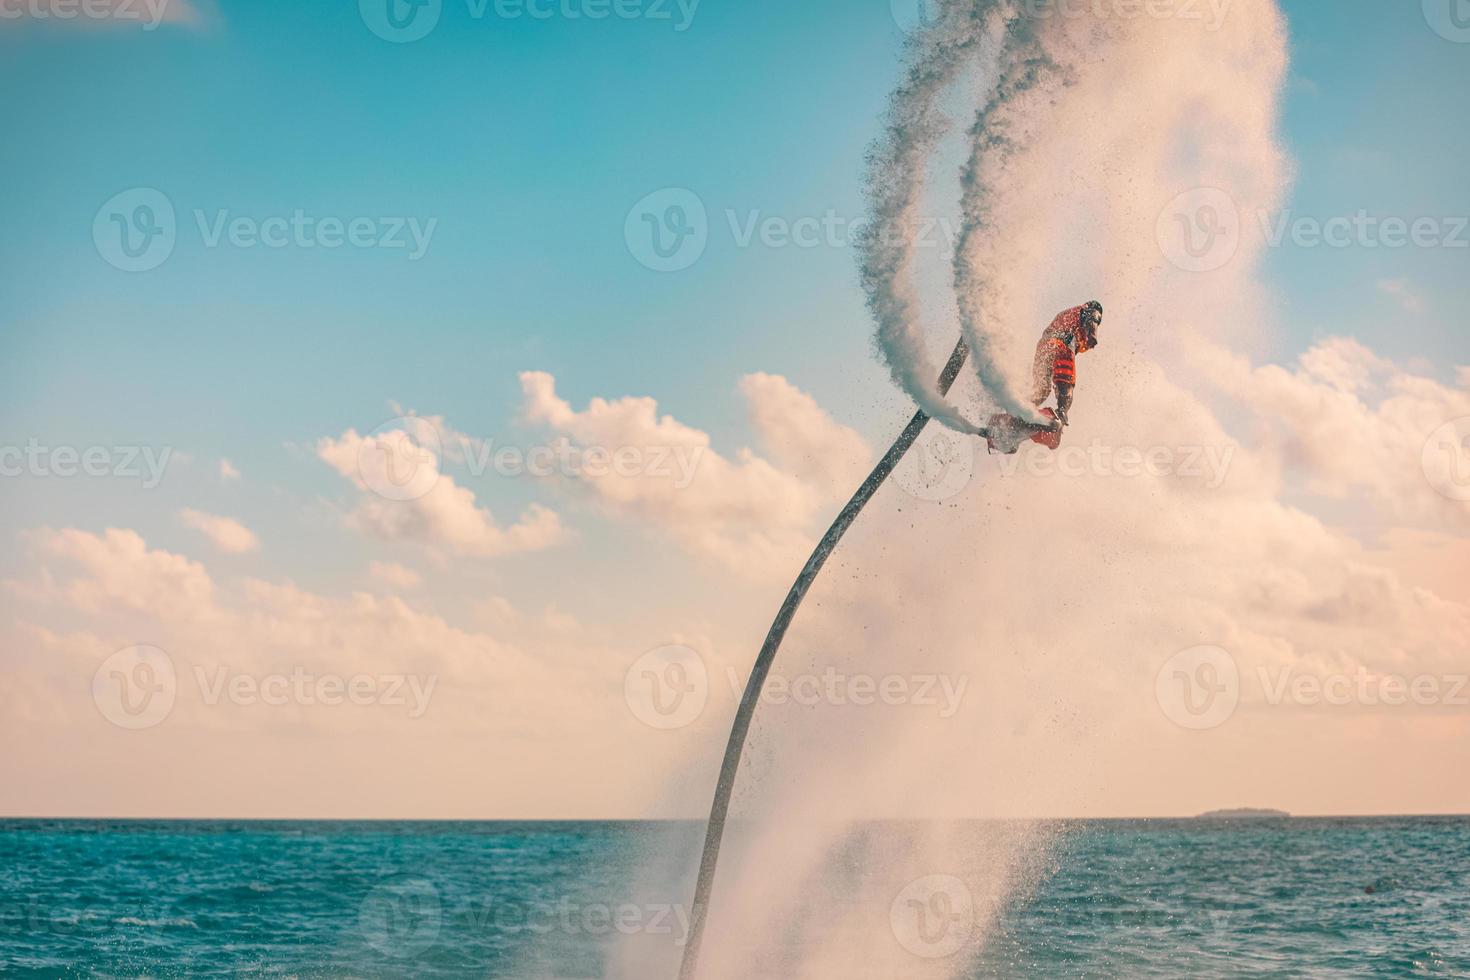 Professional pro fly board rider in tropical sea, water sports concept background. Summer vacation fun outdoor sport and recreation photo